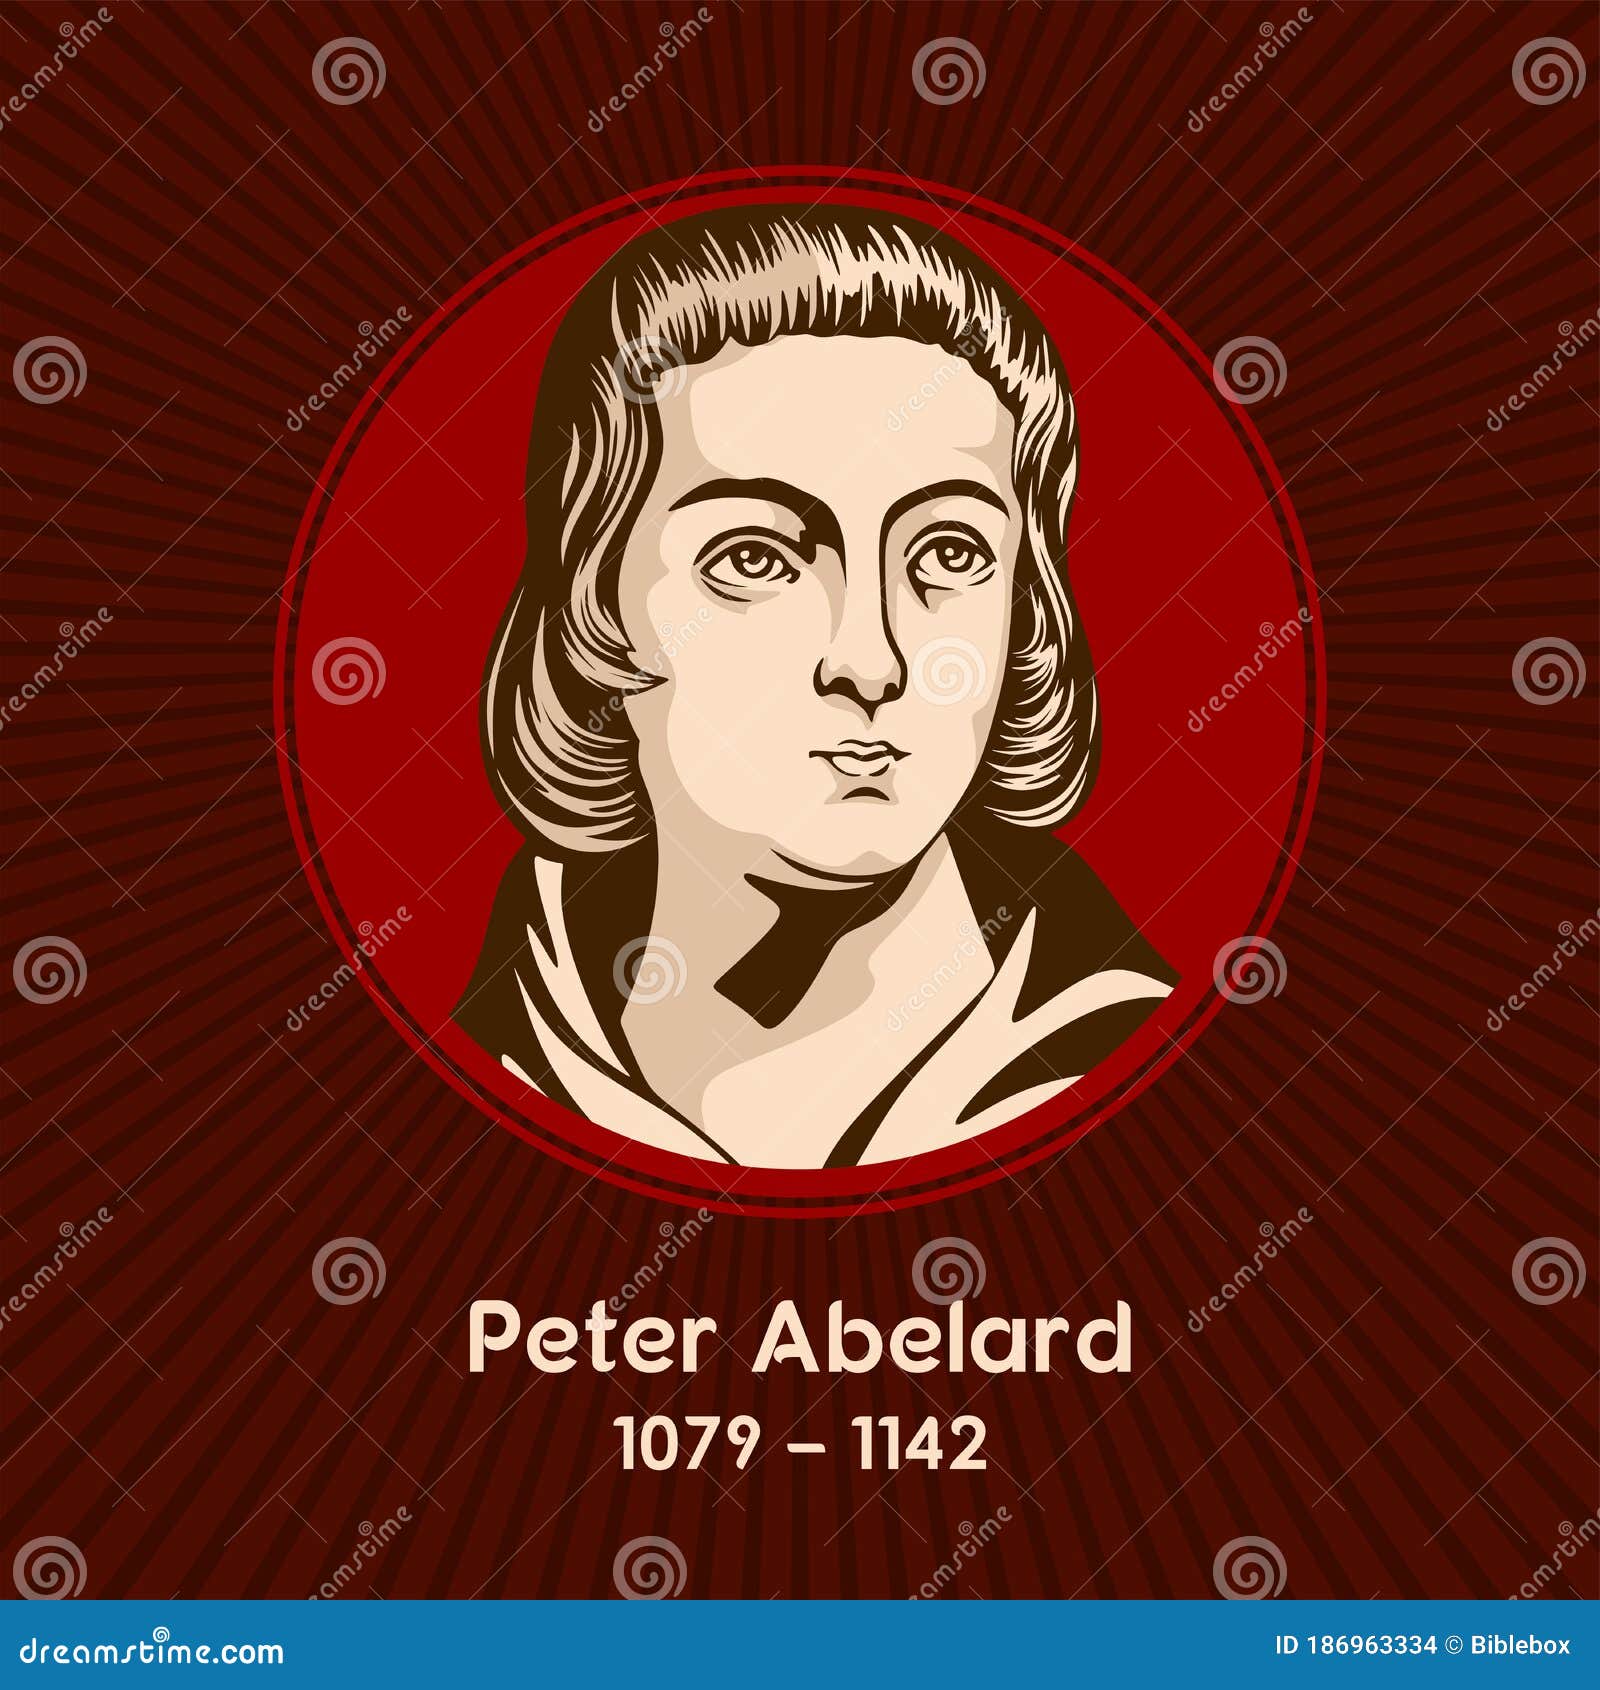 peter abelard 1079-1142 was a medieval french scholastic philosopher, theologian, and preeminent logician